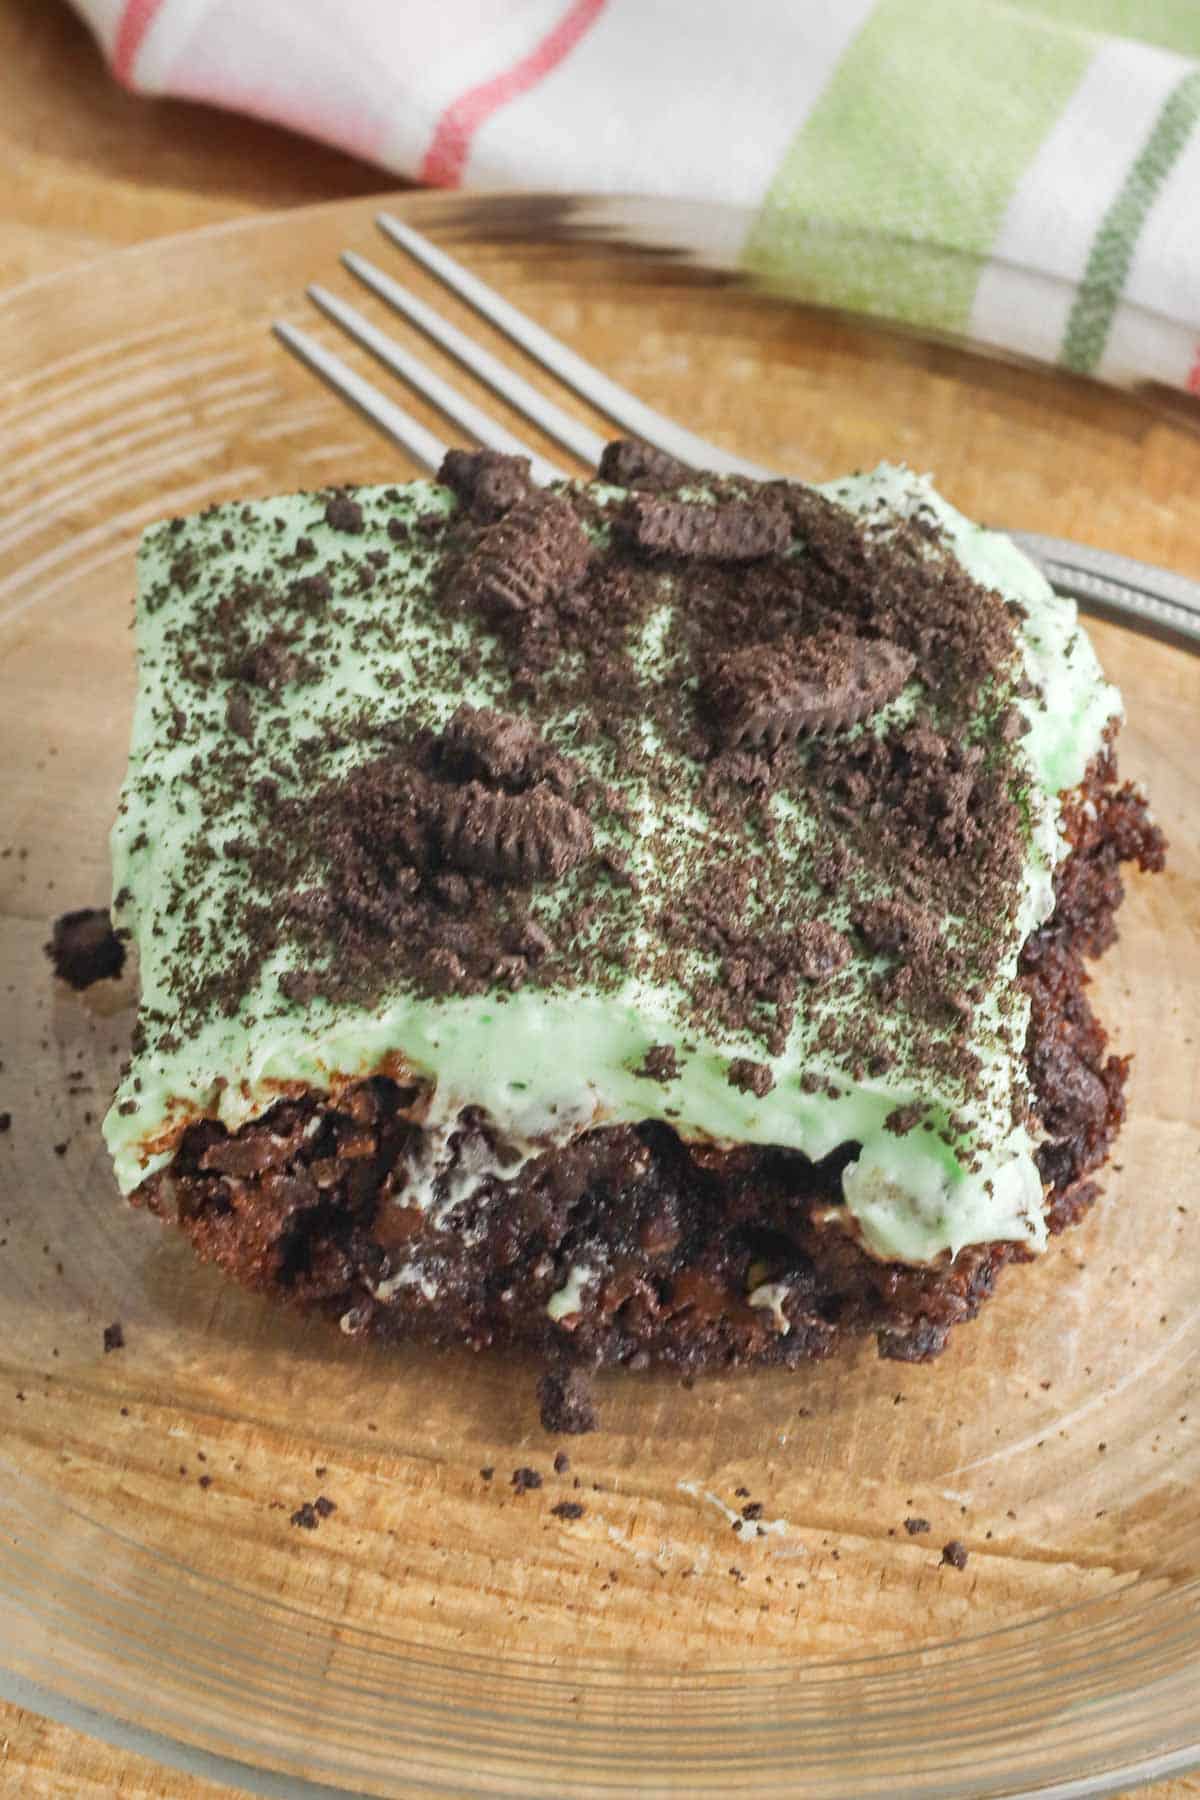 grasshopper brownie with a green fluffy layer topped with chocolate cookie crumbs.